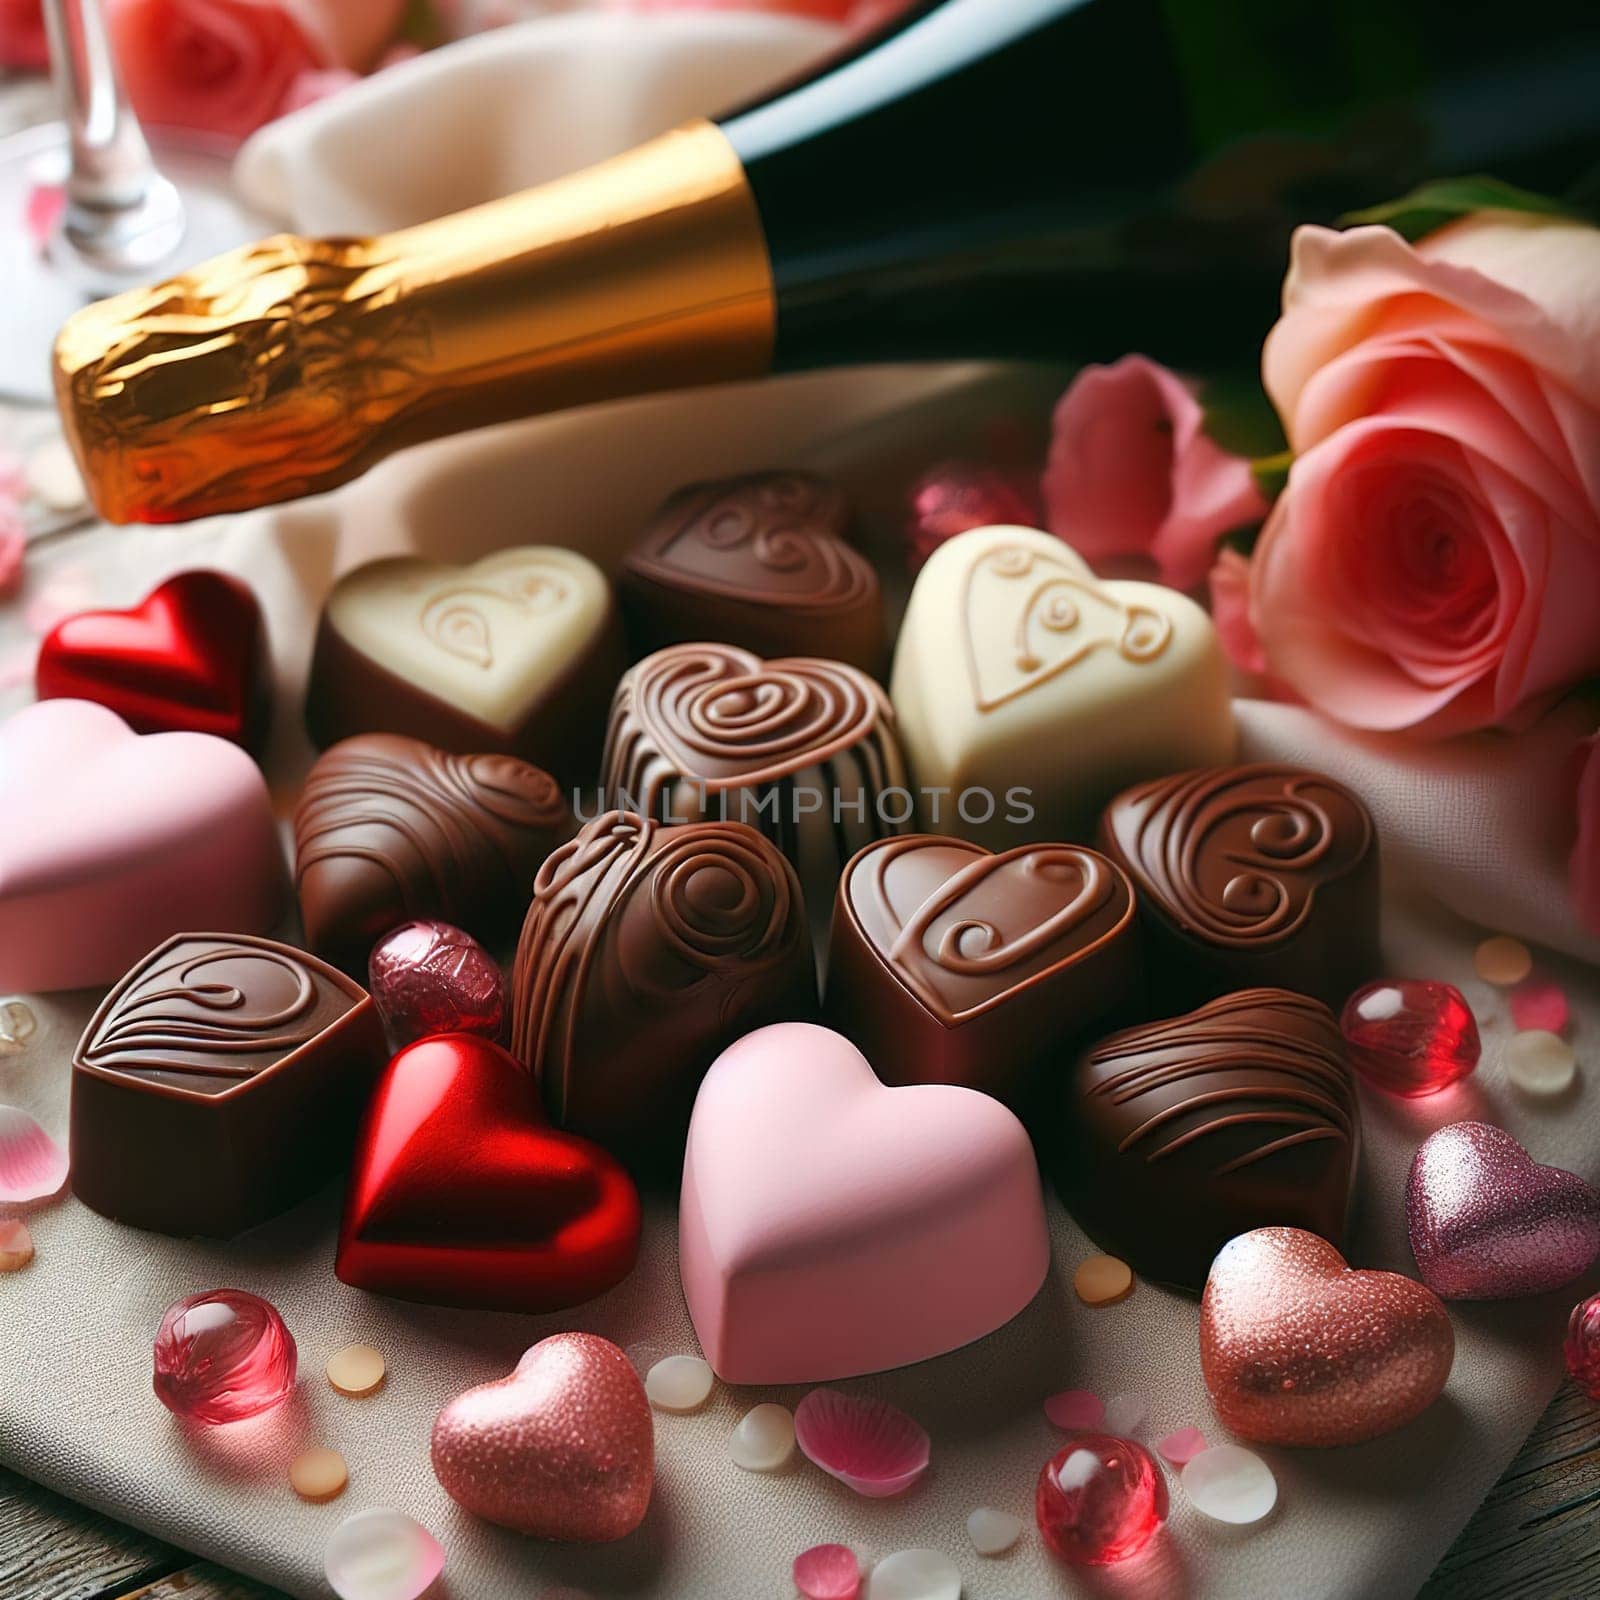 Heart-shaped sweets for Valentine's Day. High quality photo